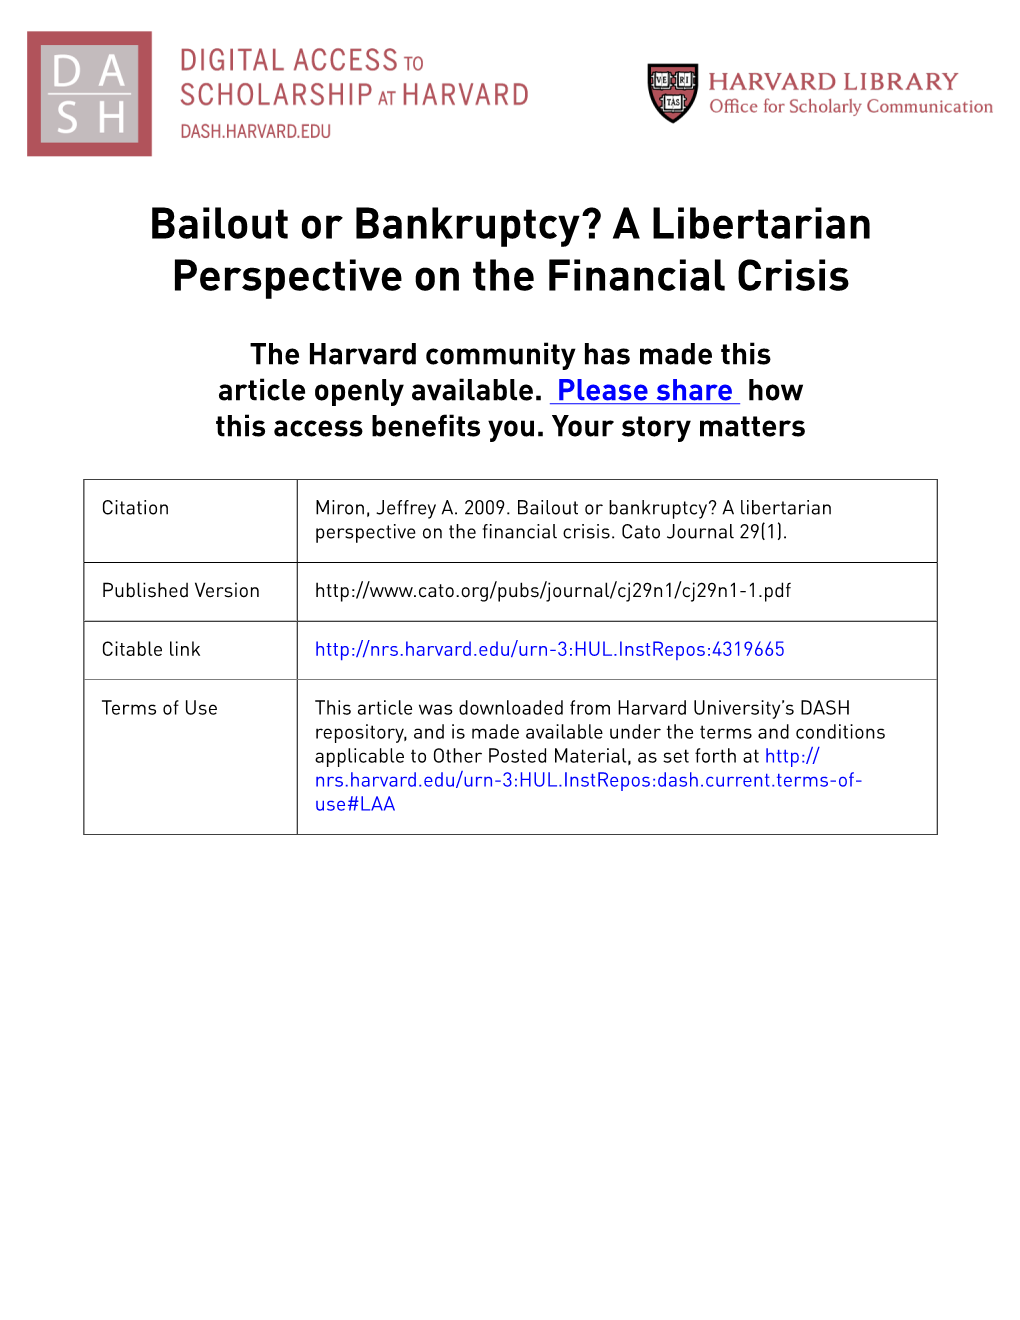 Bailout Or Bankruptcy? a Libertarian Perspective on the Financial Crisis